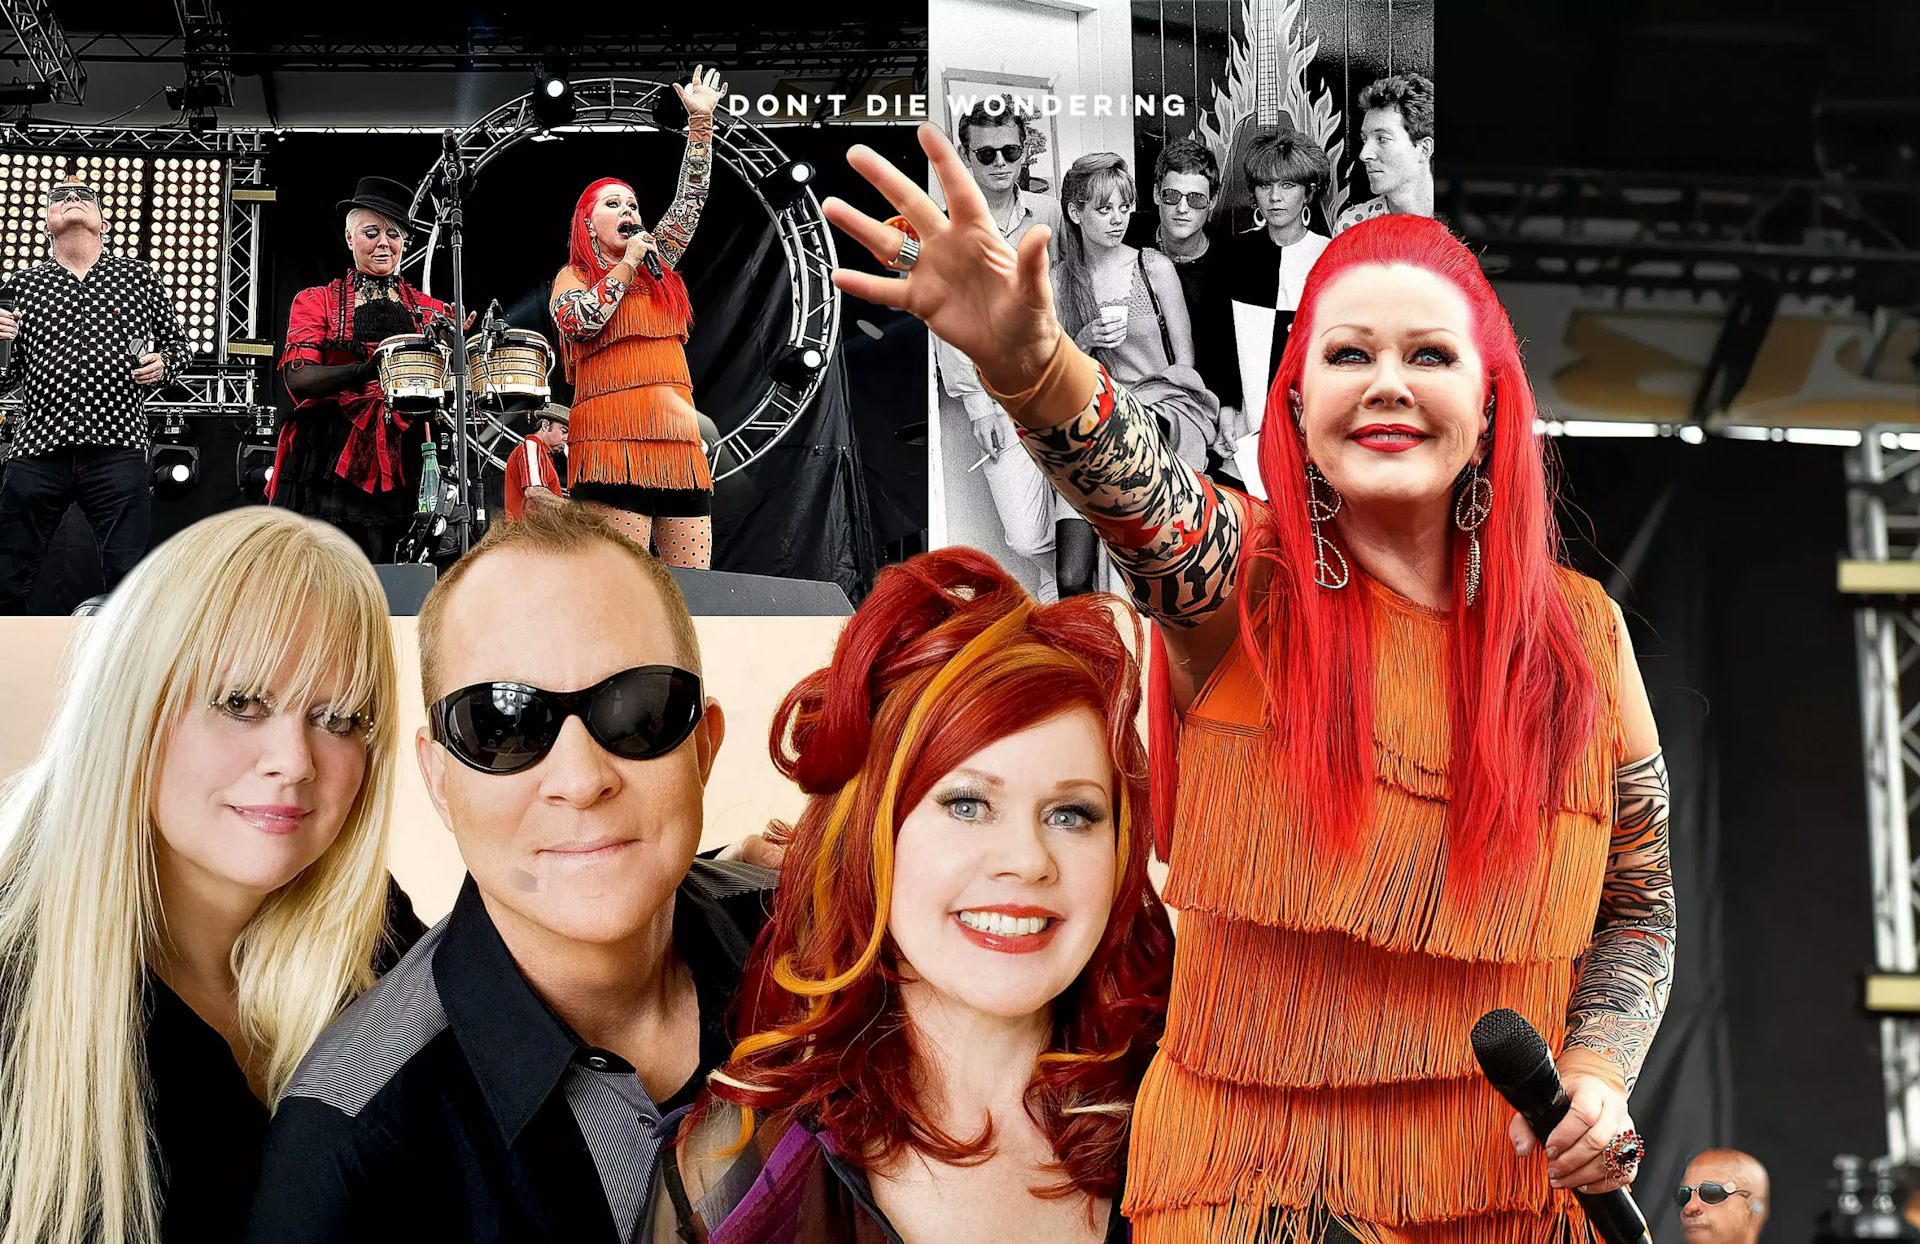 will the b52's tour again